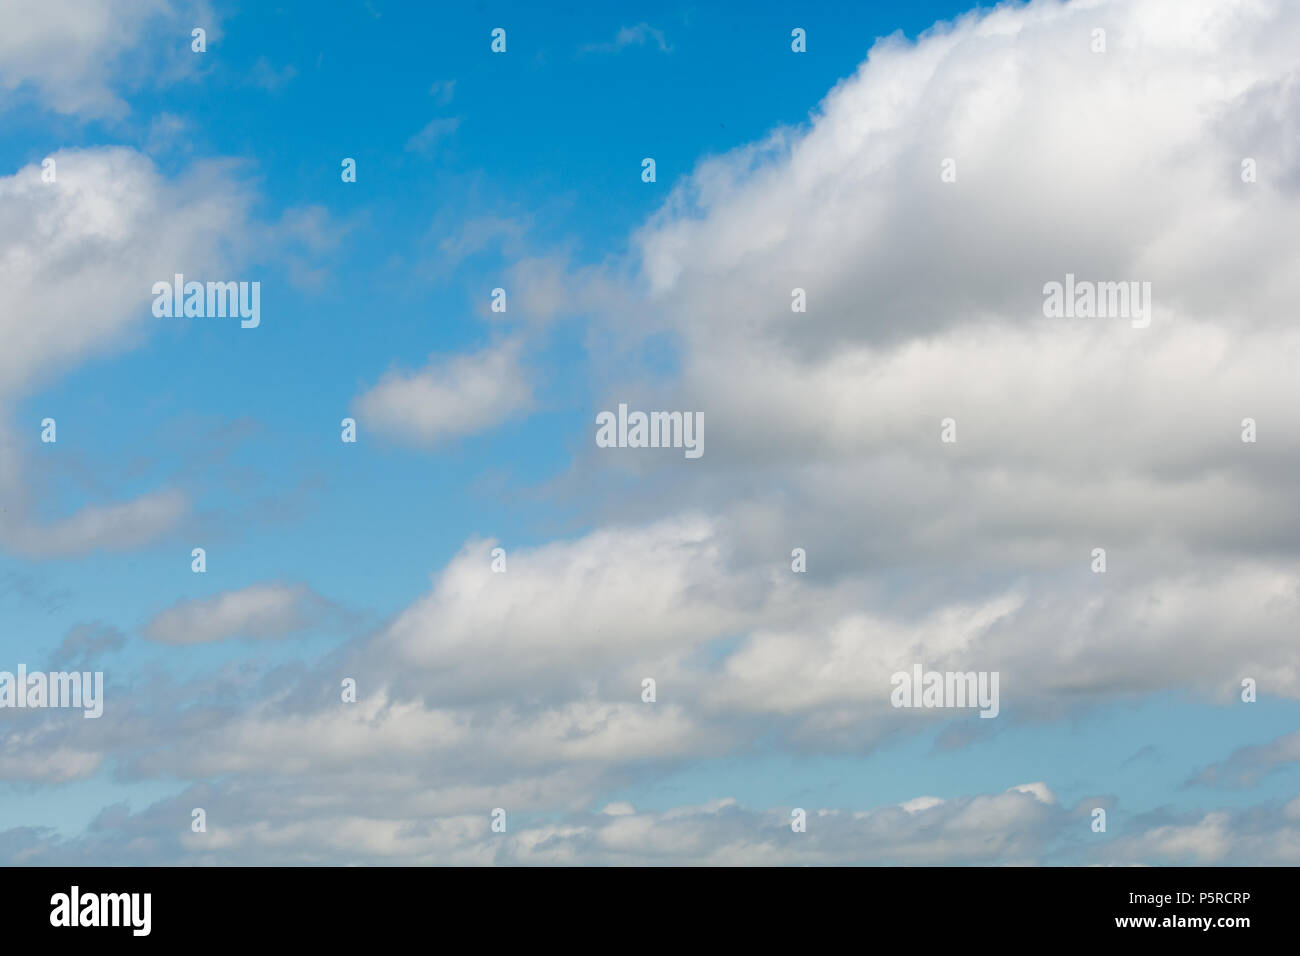 Sky background, clear blue skies with white cloud formation Stock Photo